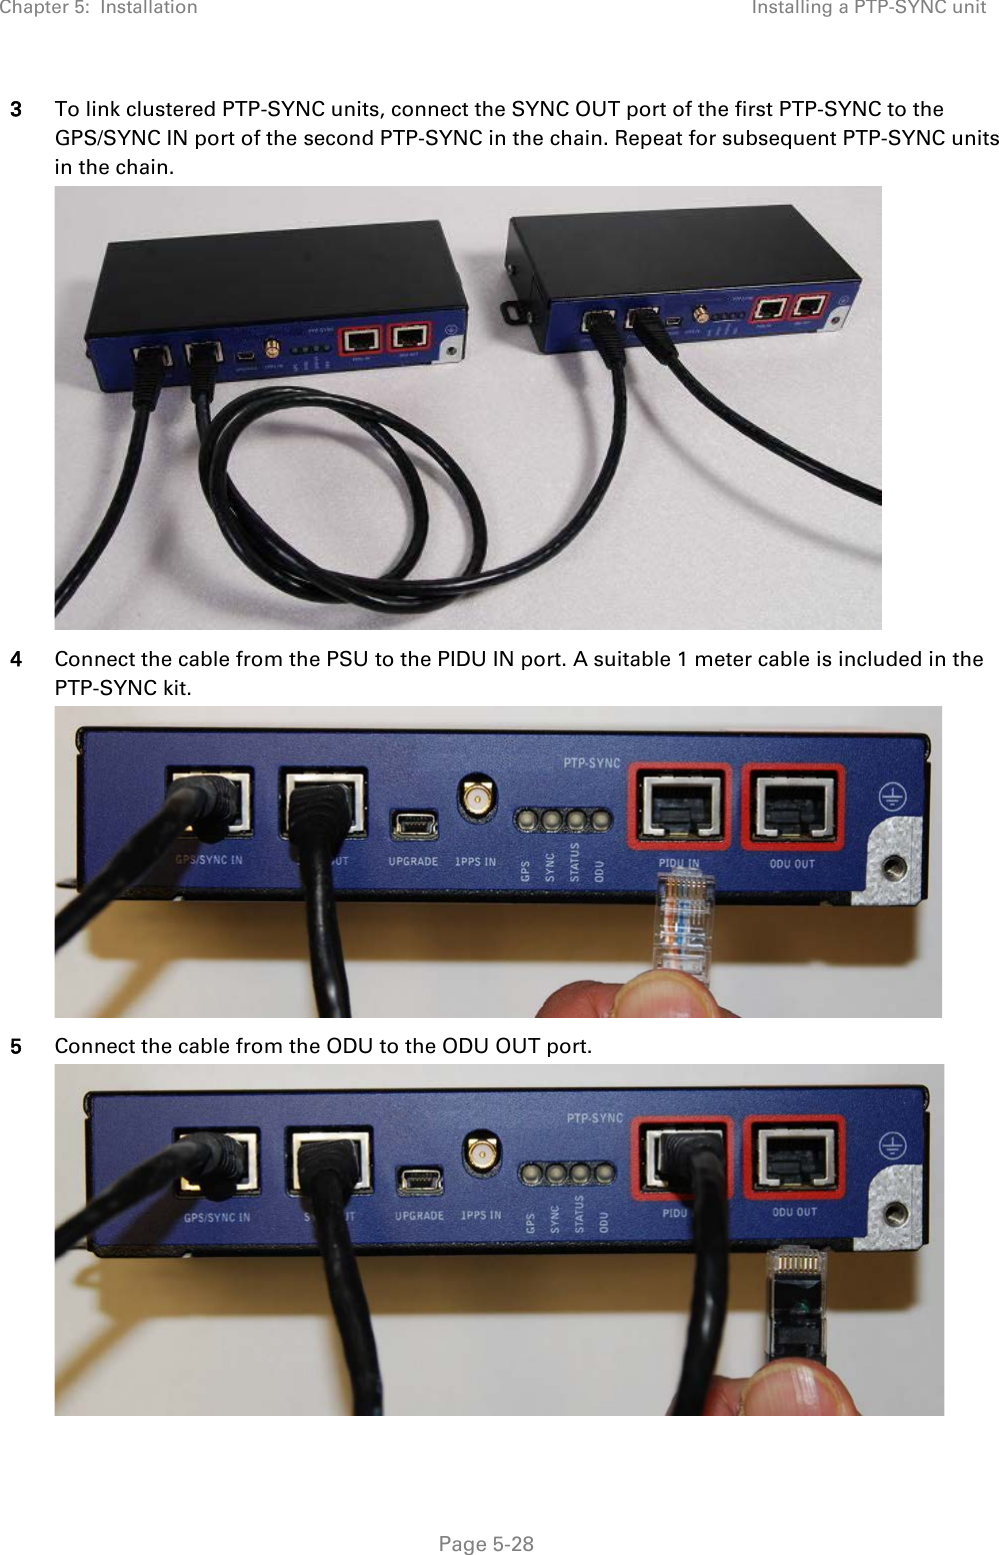 Chapter 5:  Installation Installing a PTP-SYNC unit  3 To link clustered PTP-SYNC units, connect the SYNC OUT port of the first PTP-SYNC to the GPS/SYNC IN port of the second PTP-SYNC in the chain. Repeat for subsequent PTP-SYNC units in the chain.  4 Connect the cable from the PSU to the PIDU IN port. A suitable 1 meter cable is included in the PTP-SYNC kit.  5 Connect the cable from the ODU to the ODU OUT port.   Page 5-28 